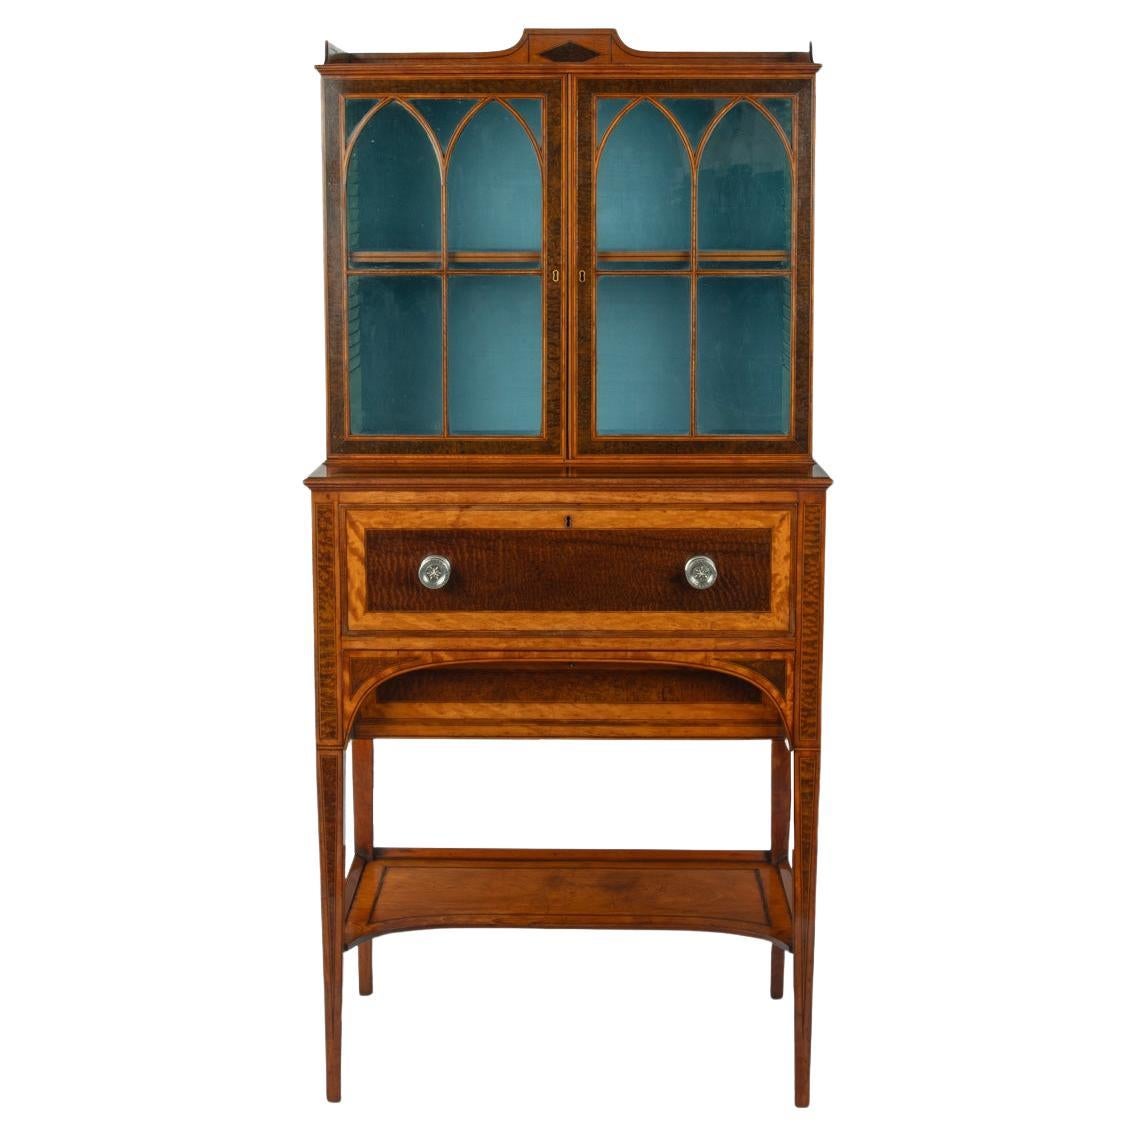 A fine late George III satinwood and snakewood secretaire cabinet